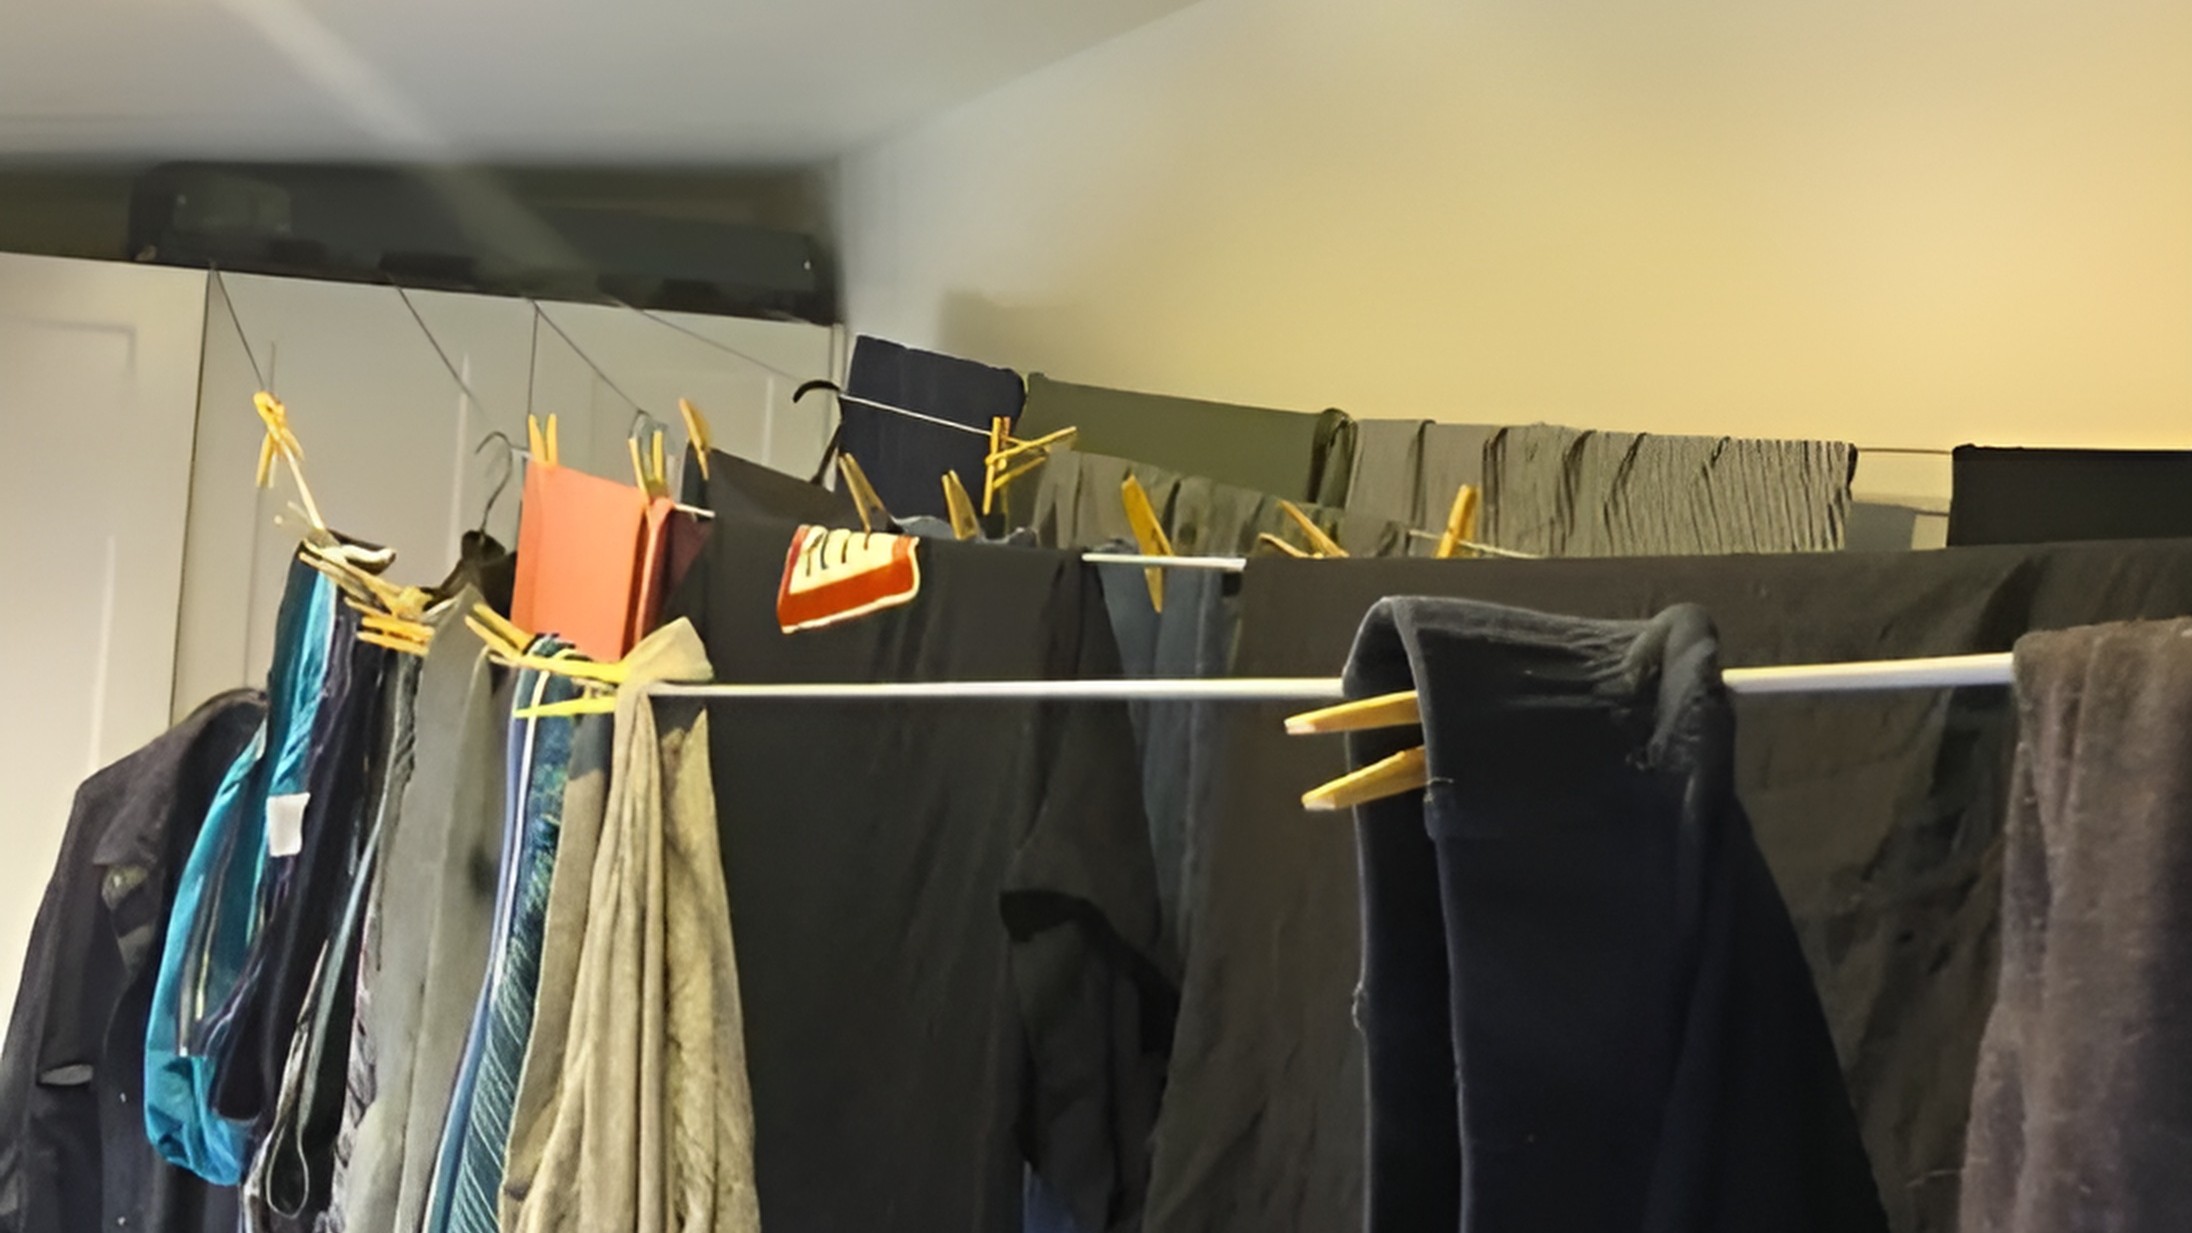 Heavy Duty Wall Mounted Washing Line Fit for Kings: Accommodating King Sized Sheets